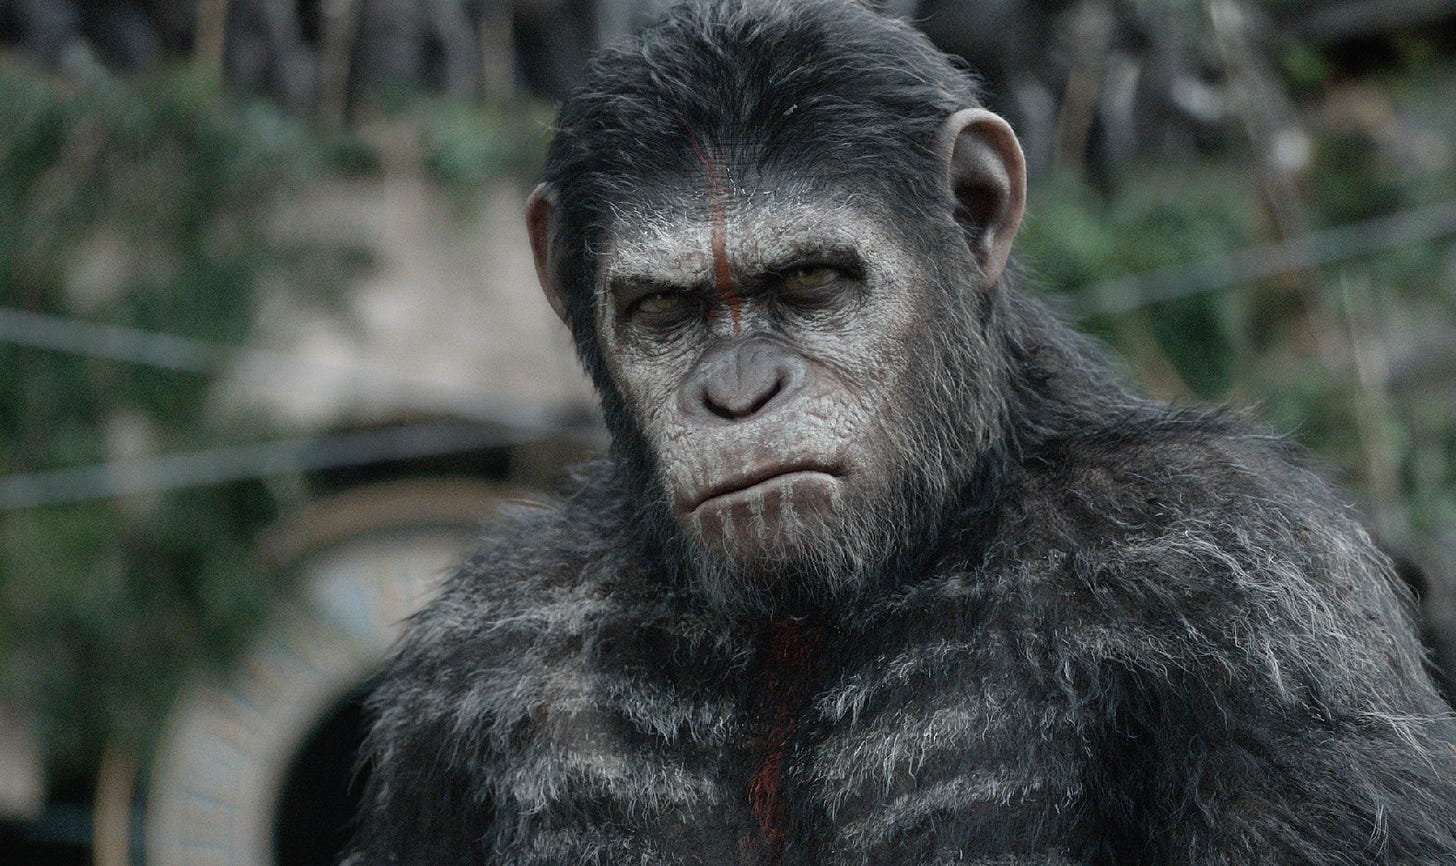 A Complete History of 'Planet of the Apes'